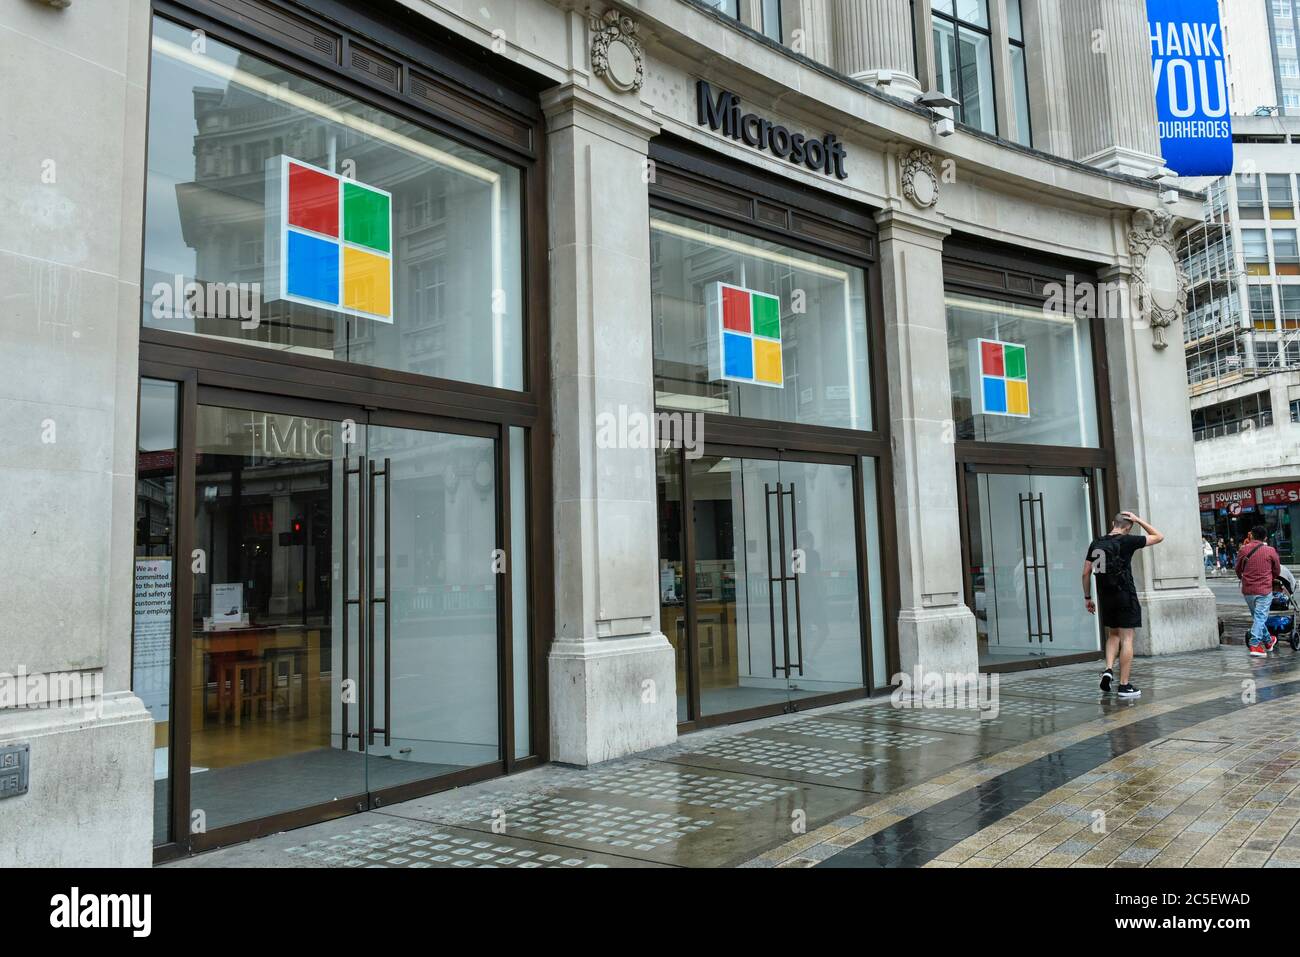 London, UK.  2 July 2020.  Exterior of the Microsoft store at Oxford Circus.  Microsoft has announced that all physical store locations in the USA will close, retail staff members will move to serve customer from corporate offices at a cost of $450m.  Stores in international locations such as London will be 're-imagined' as places for customers. Credit: Stephen Chung / Alamy Live News Stock Photo